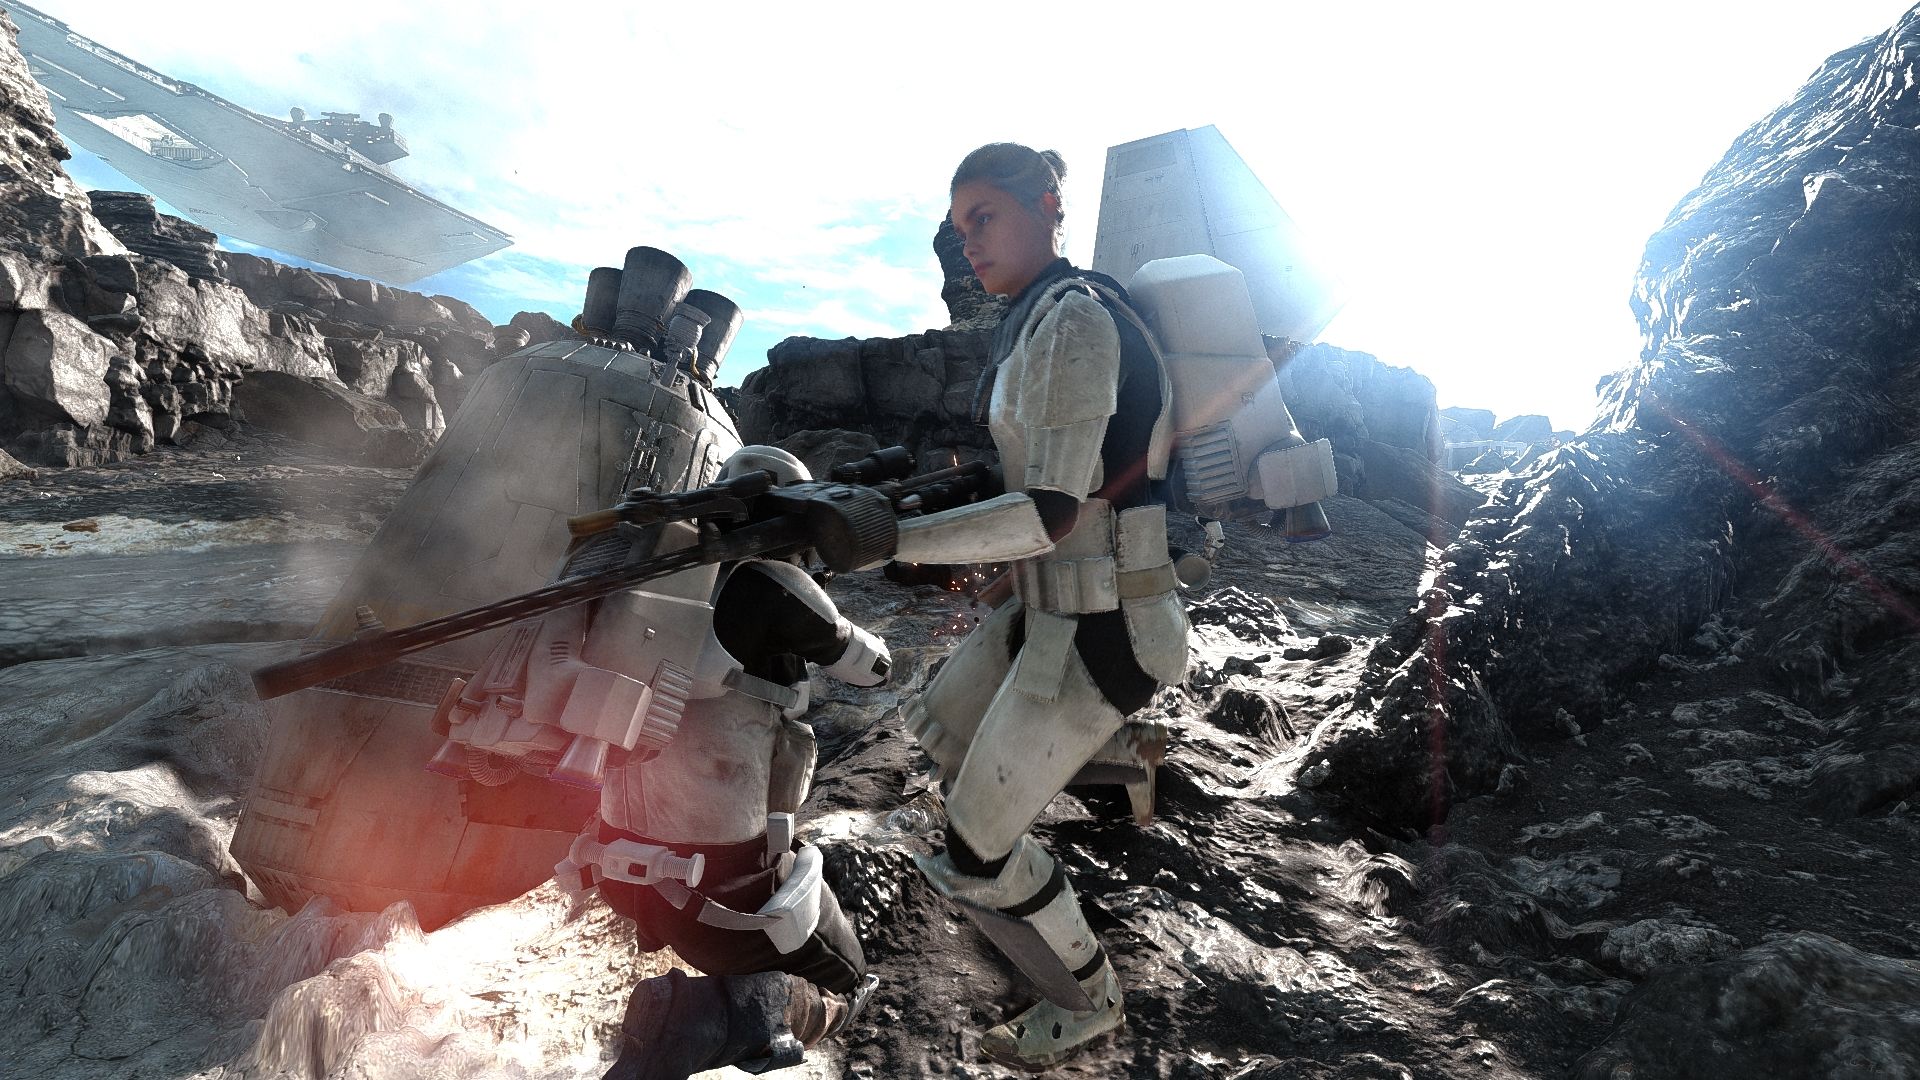 Two stormtroopers looking over one another's backs with weapons loaded.